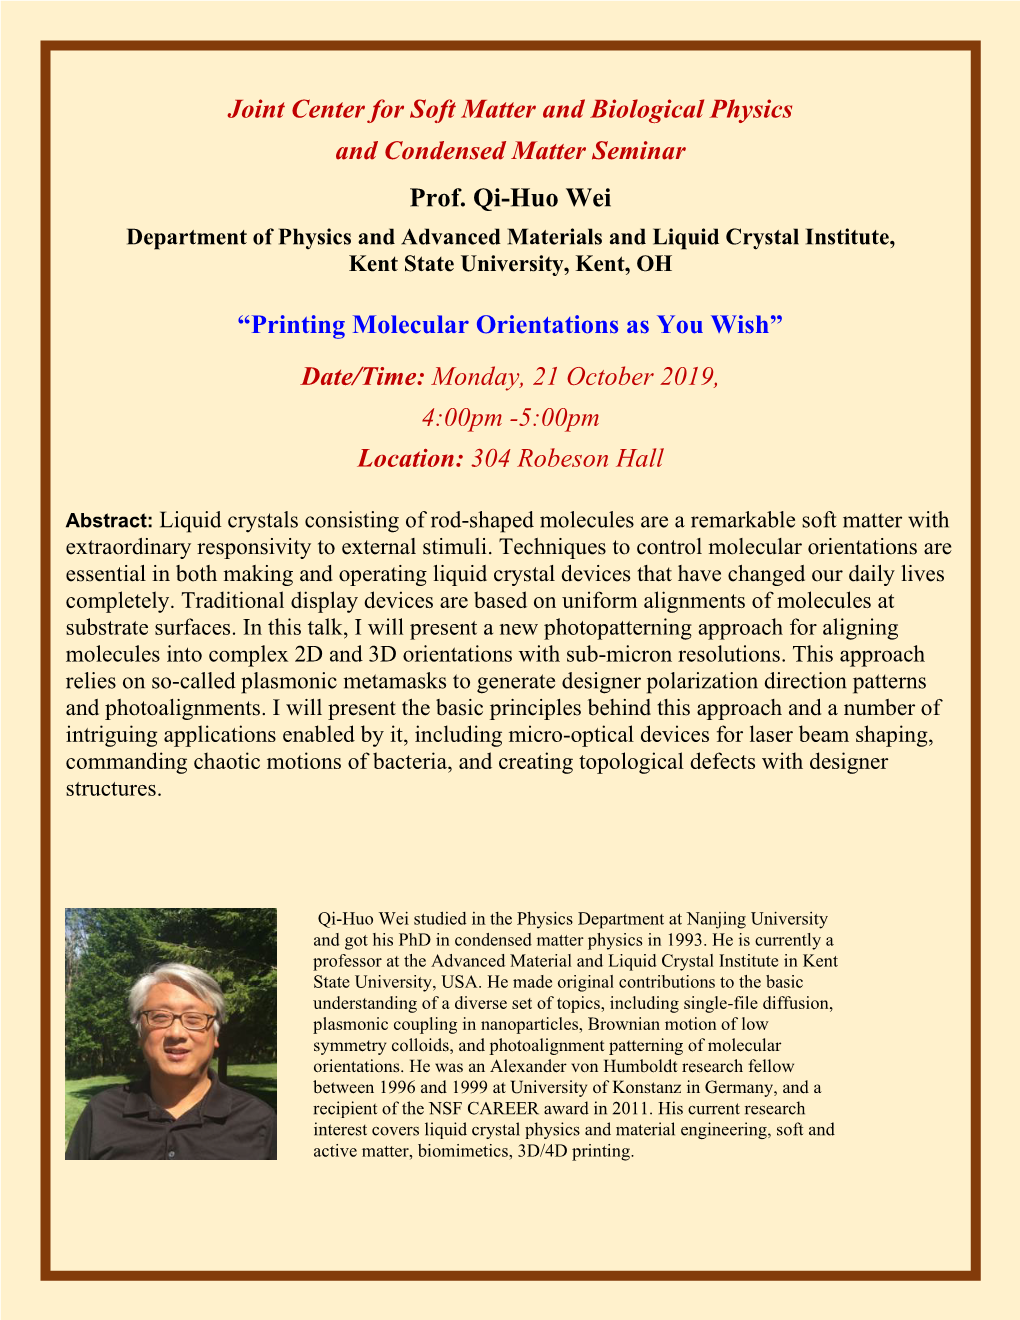 Joint Center for Soft Matter and Biological Physics and Condensed Matter Seminar Prof